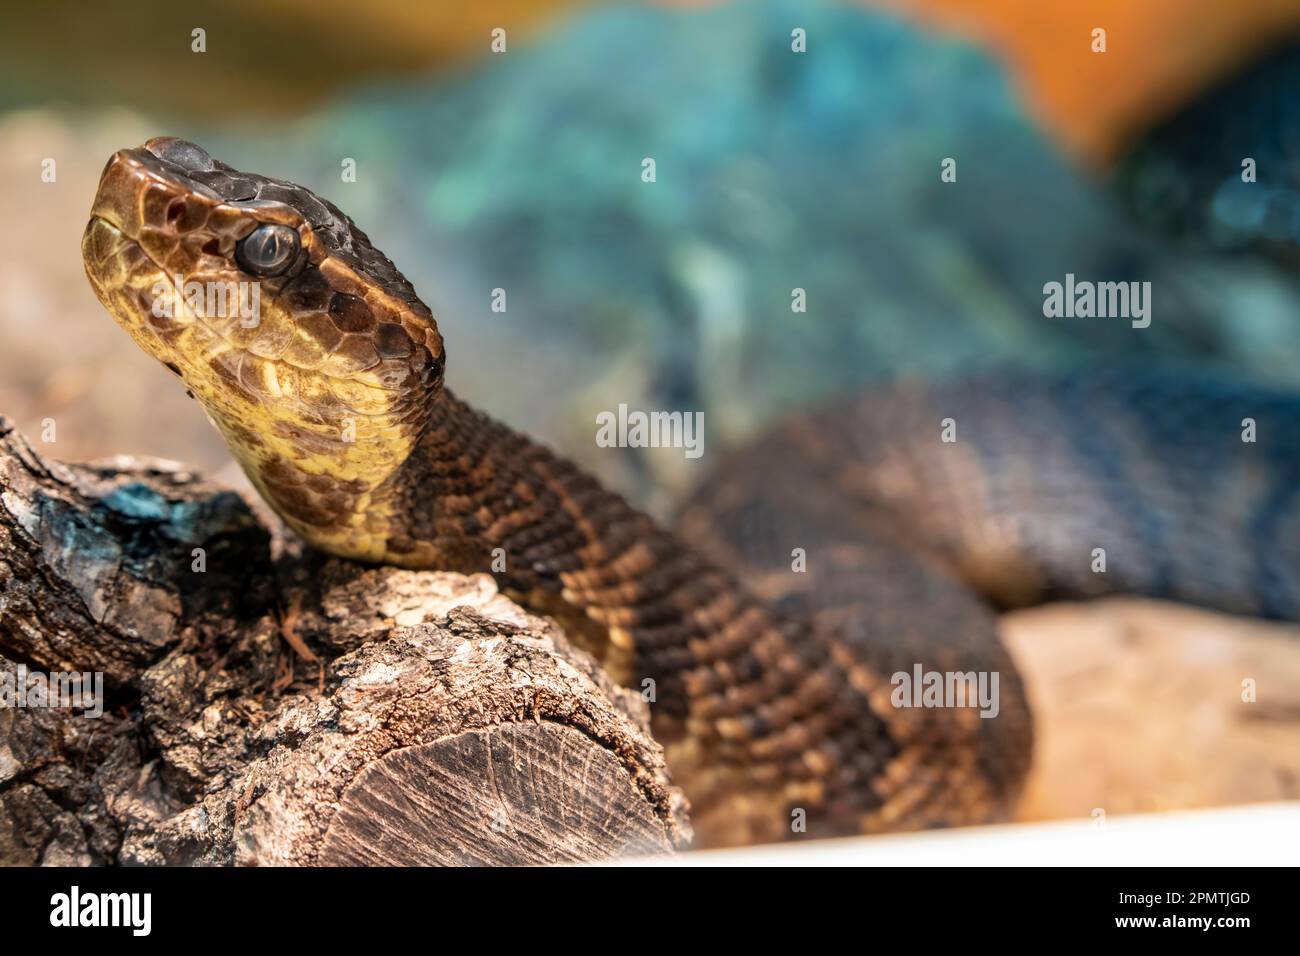 Northern cottonmouth (Agkistrodon piscivorus) is one of the world's few semiaquatic vipers  and is native to the southeastern United States. Stock Photo